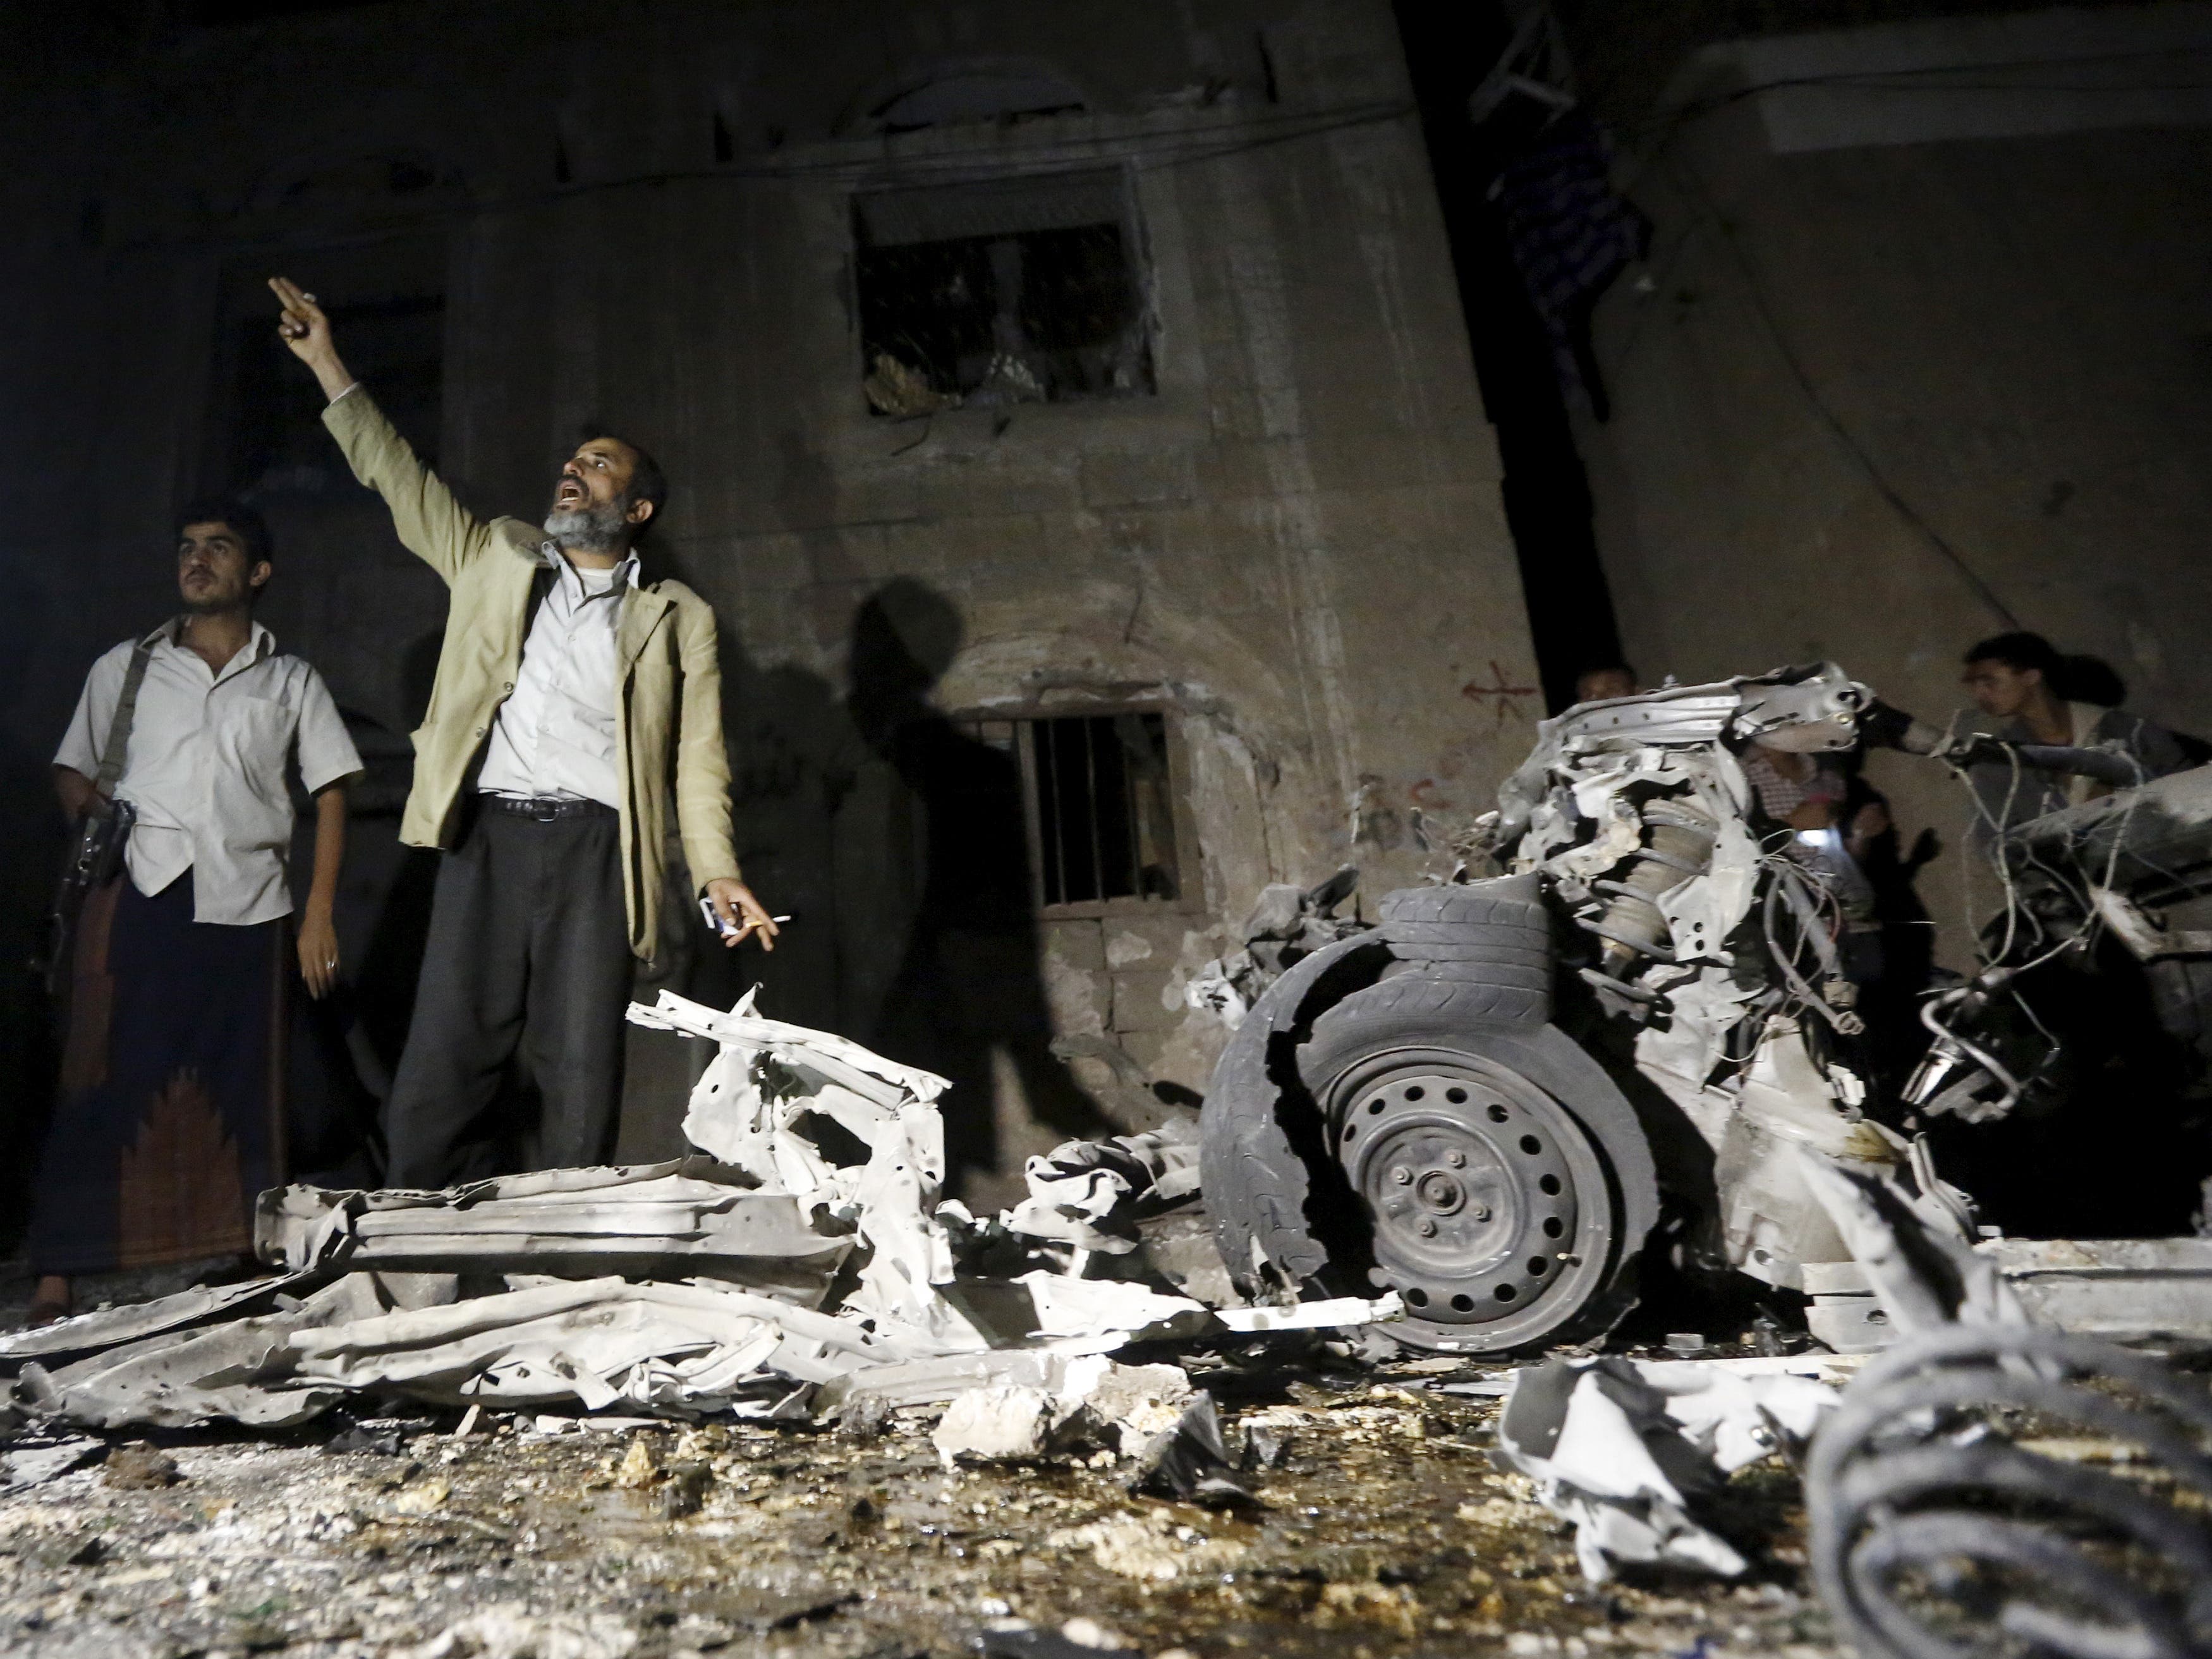 People stand next to a damaged house at the site of a car bomb attack in Yemen's capital Sanaa June 29, 2015. 